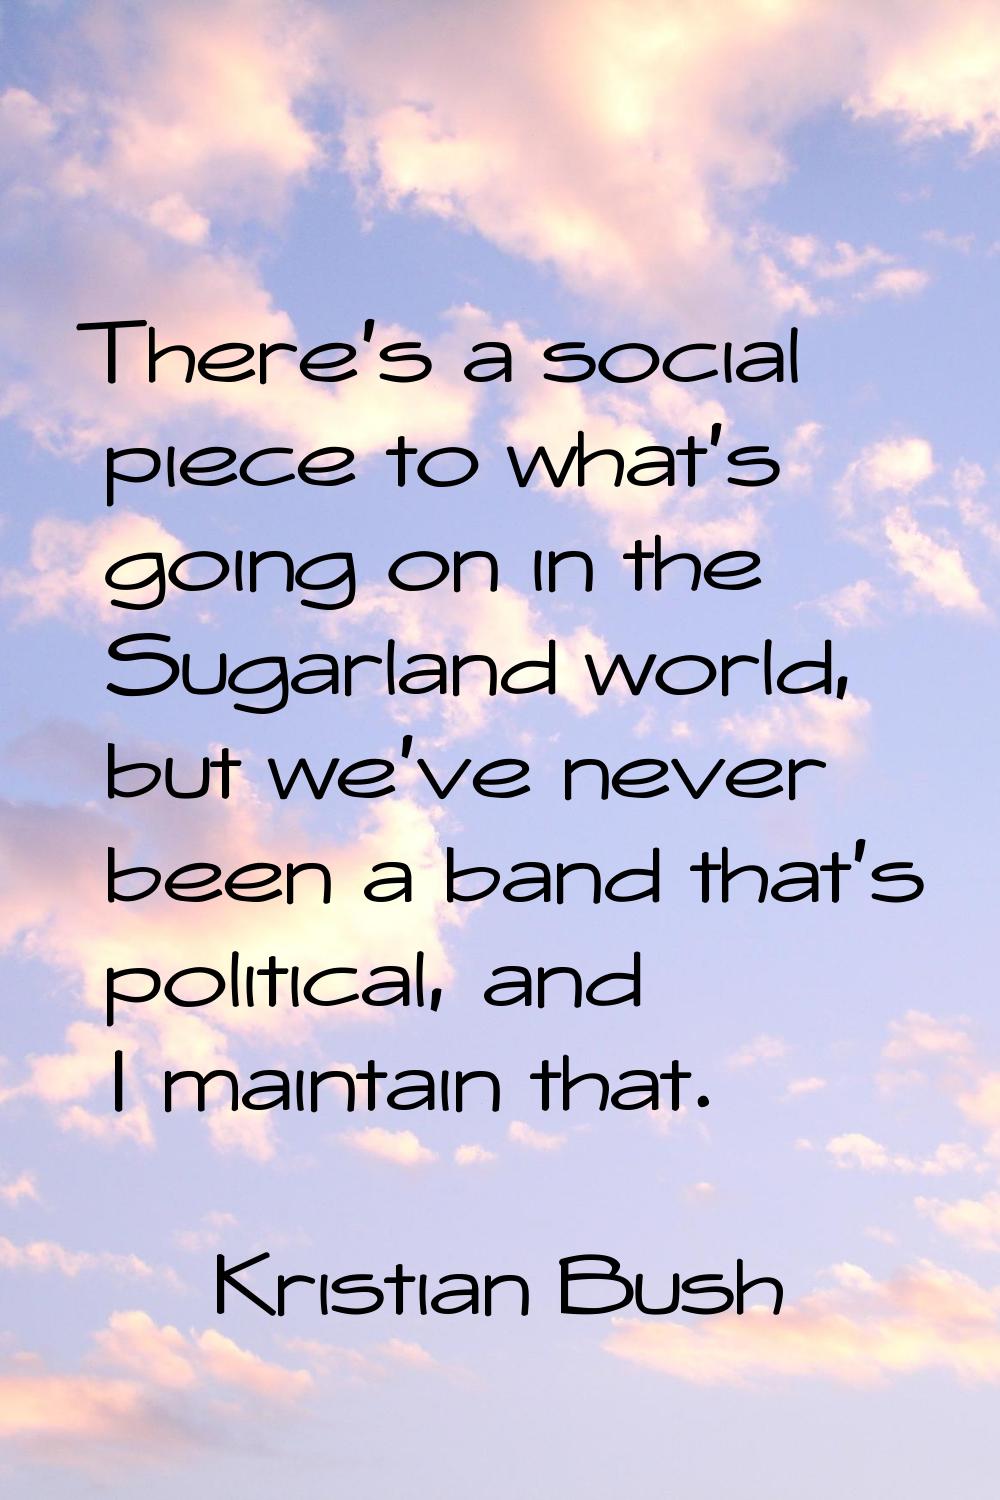 There's a social piece to what's going on in the Sugarland world, but we've never been a band that'